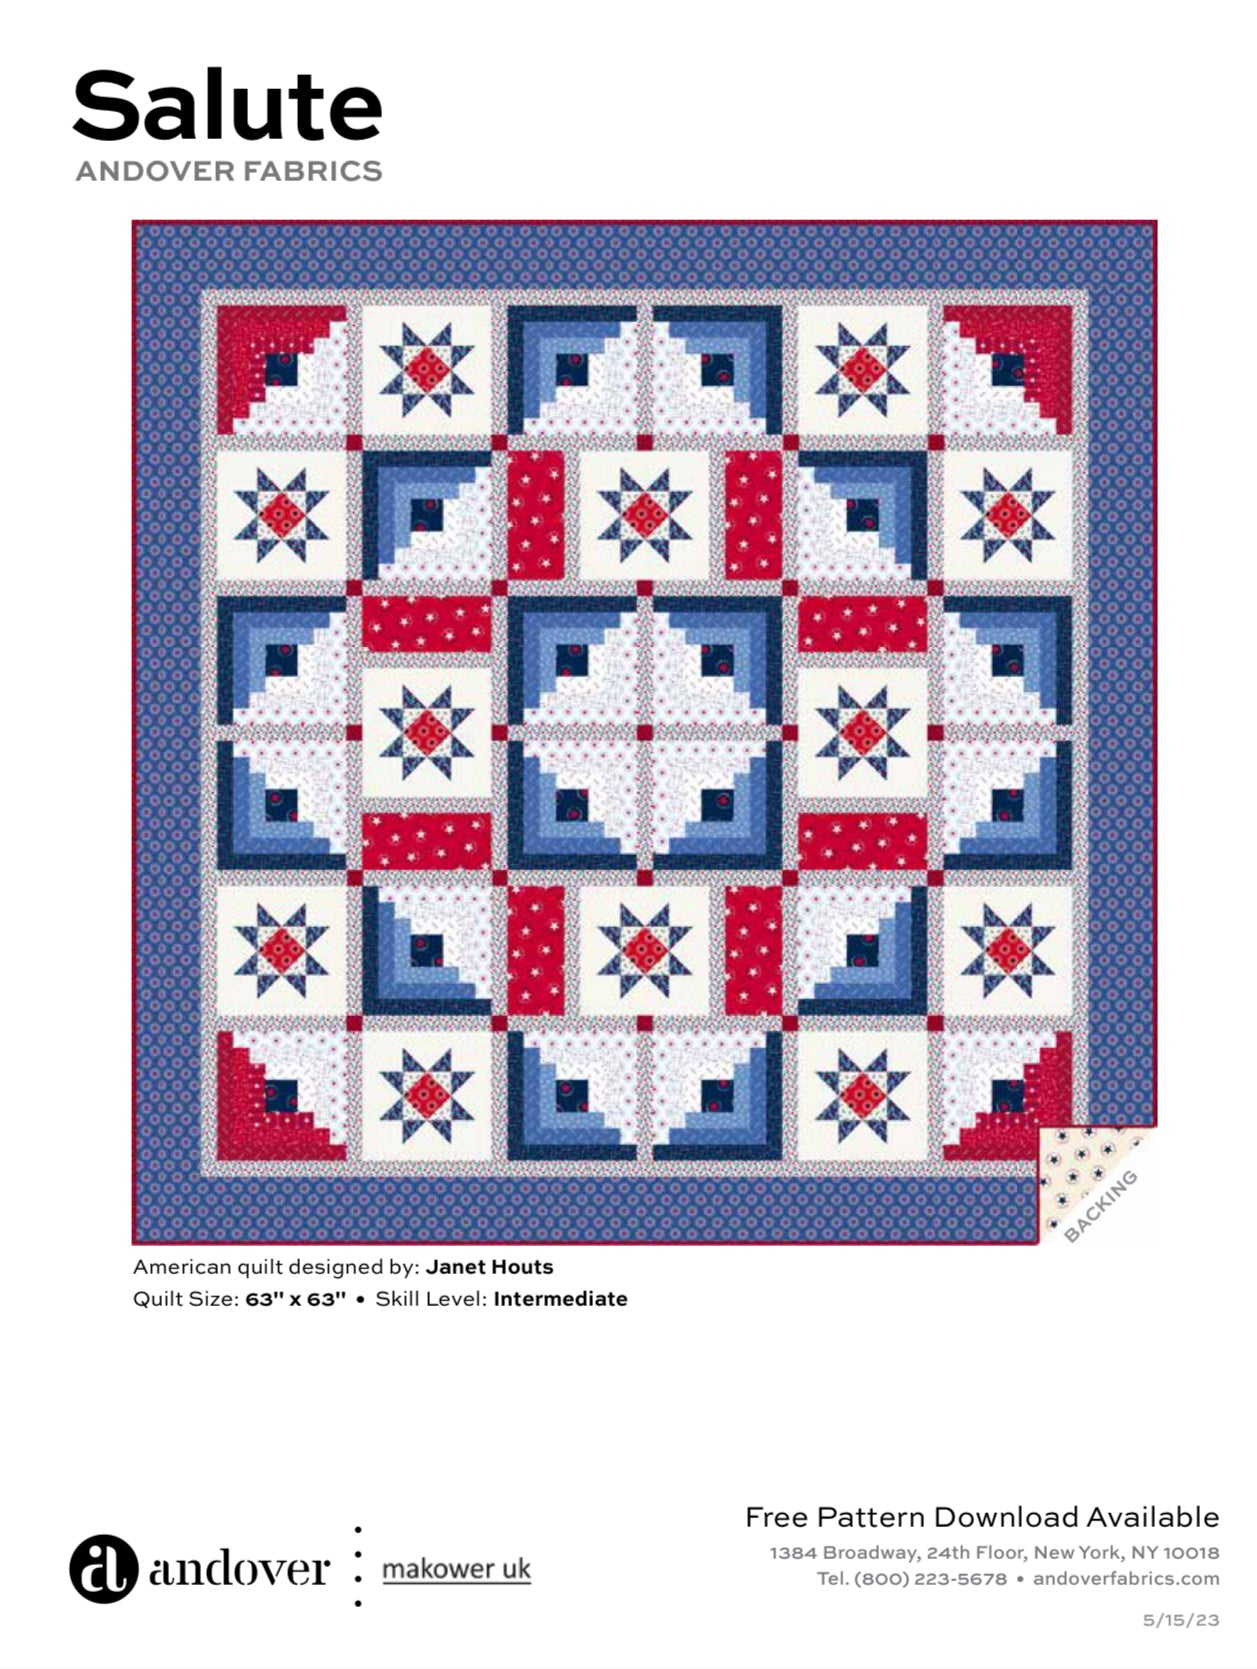 Salute Americana Quilt Pattern free PDF from Andover Fabrics